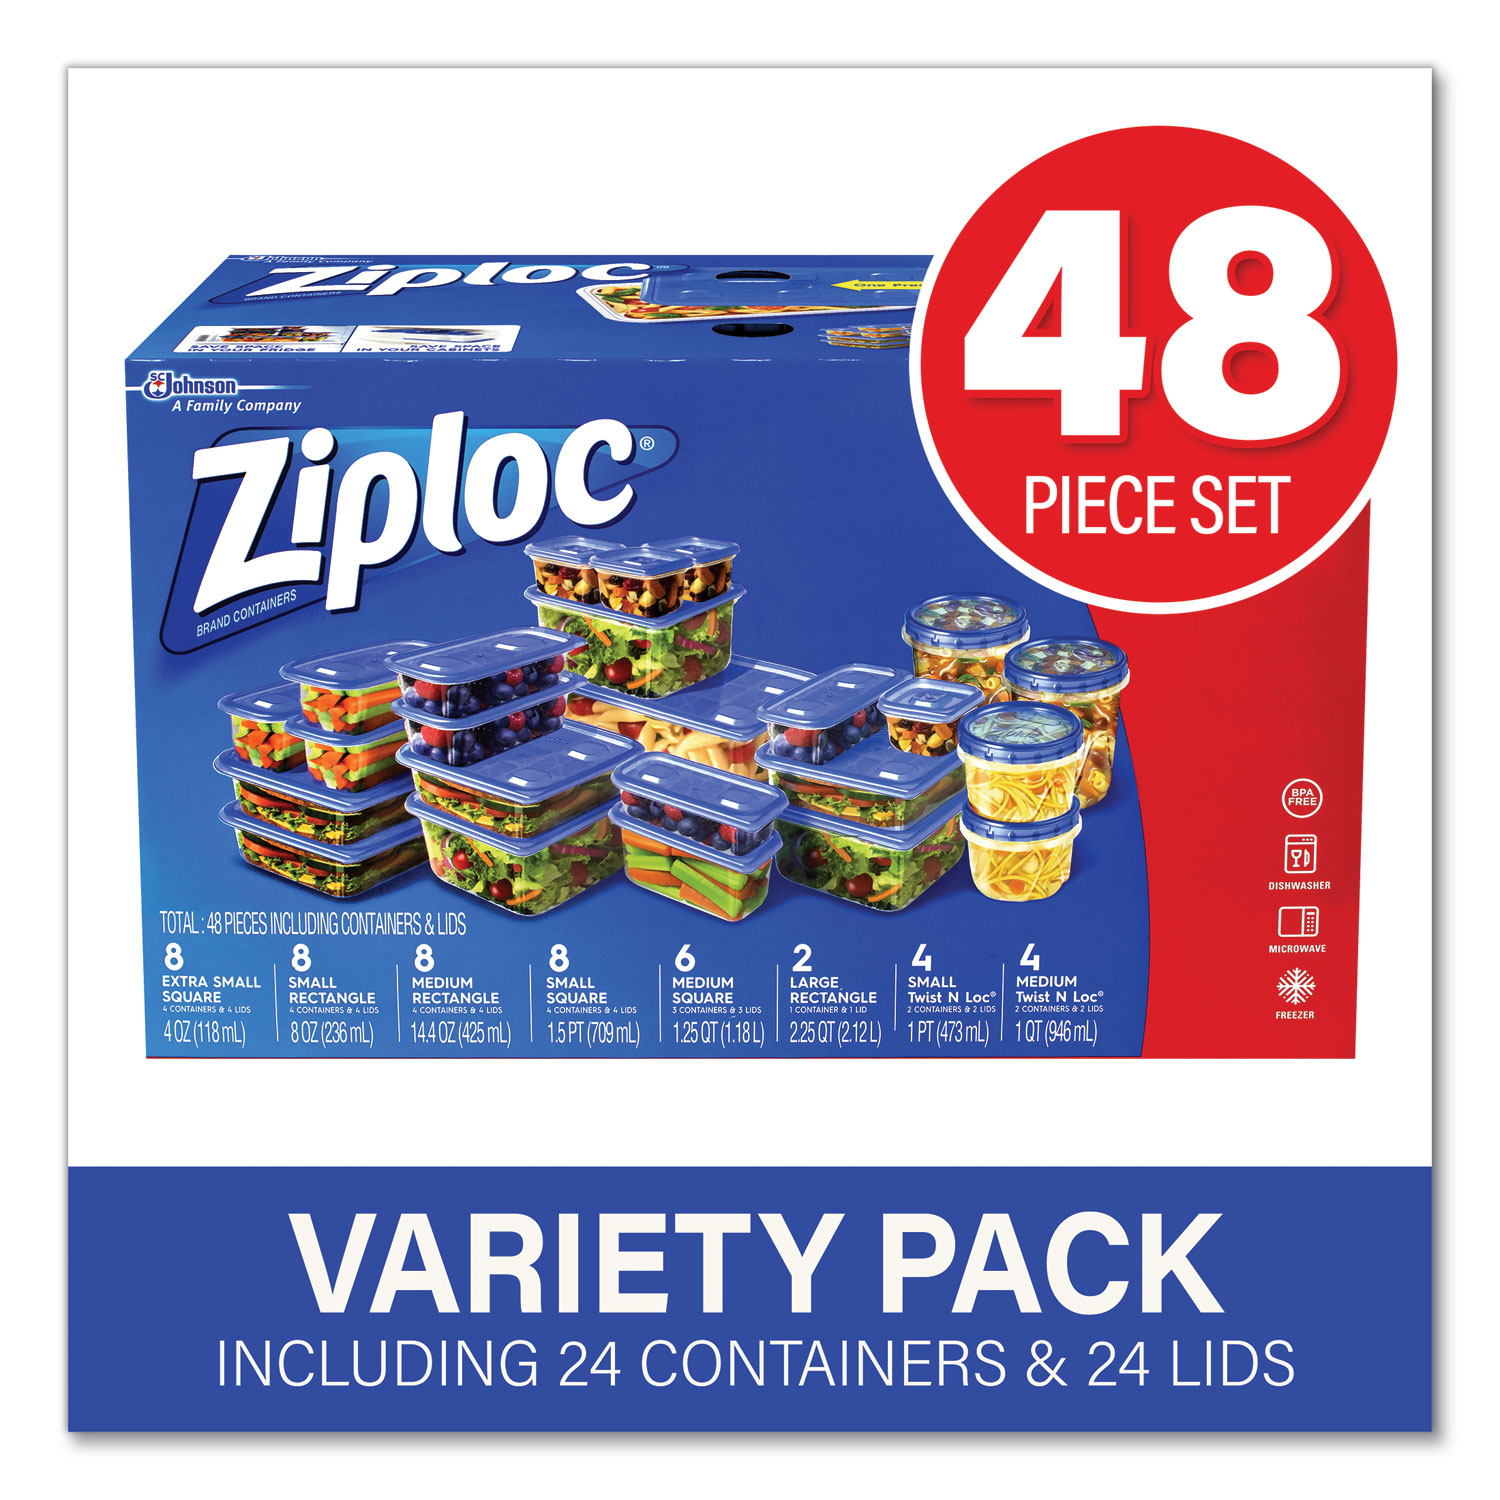  Ziploc 08358 48-Piece Plastic Containers with Lids Variety Pack, Assorted Sizes, Clear Base/Blue Lid, Free Delivery in 1-4 Business Days (GRR22001167) 